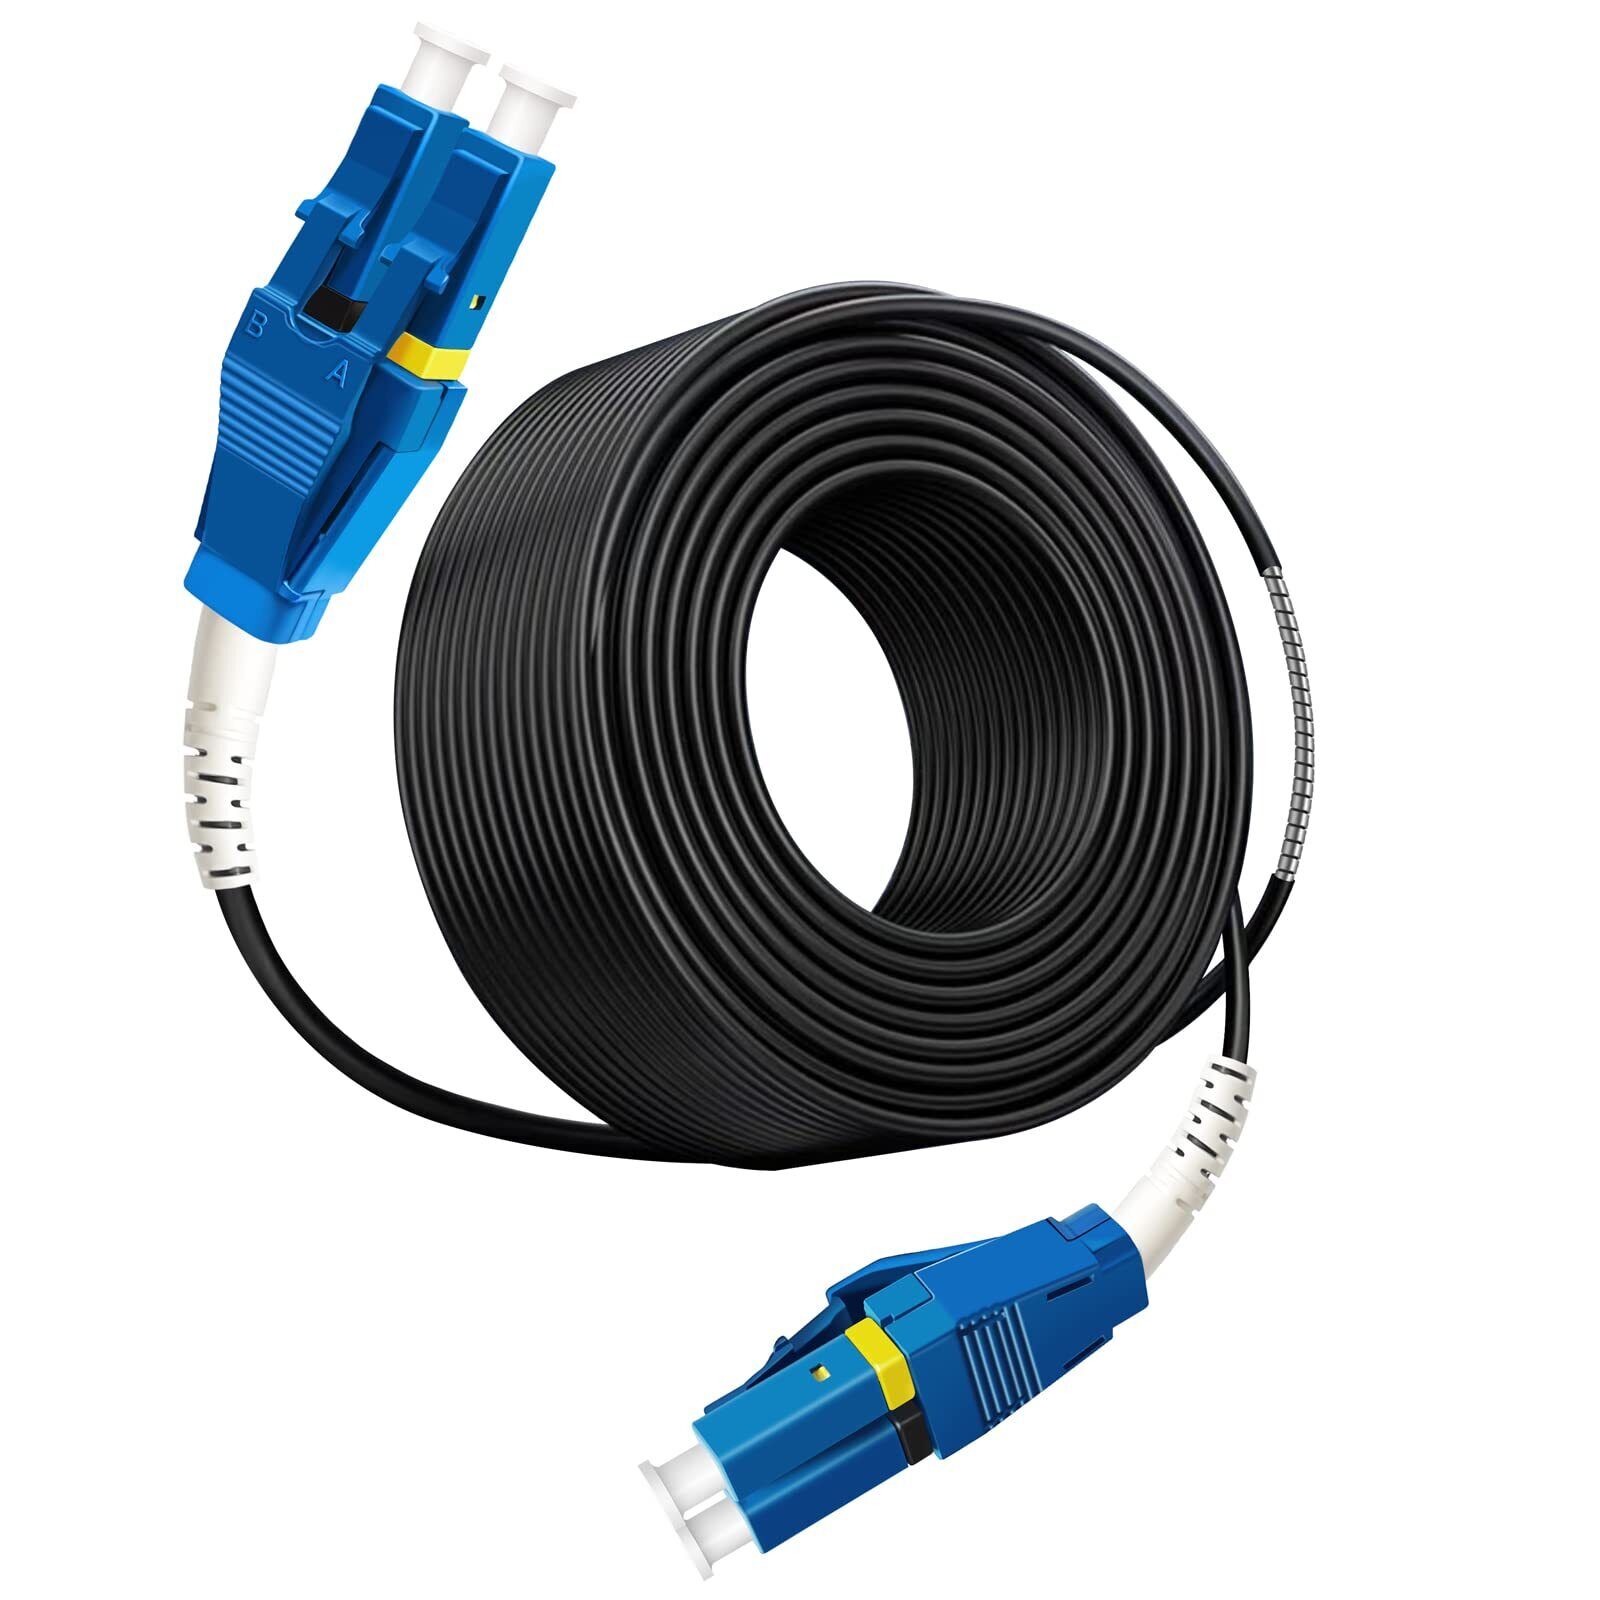 50 Meters Uniboot LC to LC Outdoor Armored Fiber Patch Cable, Low Friction Si...